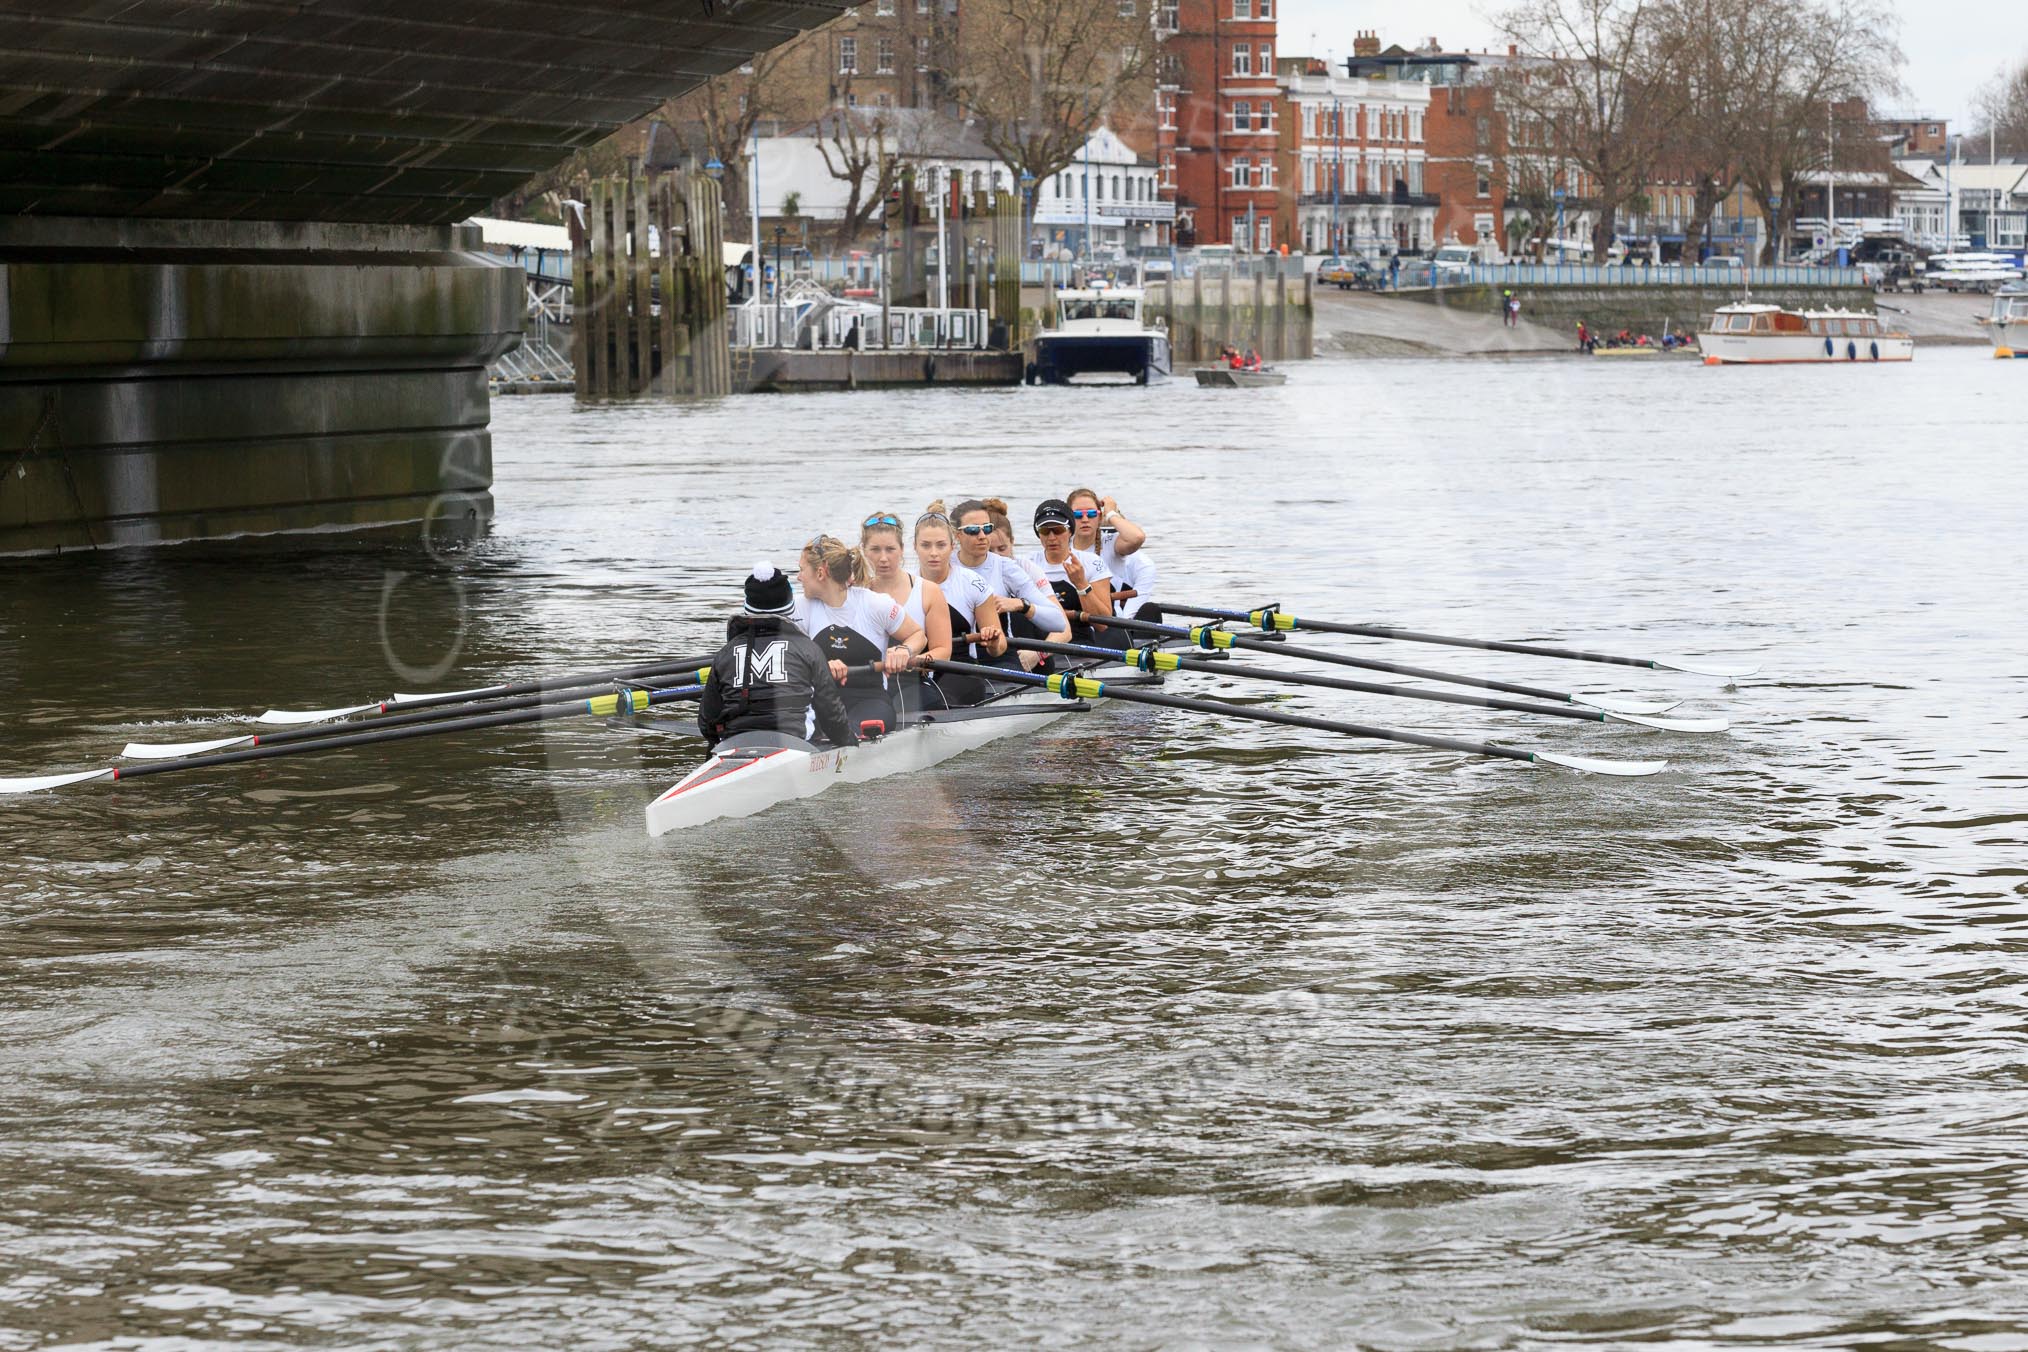 The Women's Boat Race season 2018 - fixture OUWBC vs. Molesey BC: Molesey rowing to the start at Putney Bridge: Cox Ella Taylor, stroke Katie Bartlett, 7 Emma McDonald, 6 Molly Harding, 5 Ruth Whyman, 4 Claire McKeown, 3 Gabby Rodriguez, 2 Lucy Primmer, bow Emma Boyns.
River Thames between Putney Bridge and Mortlake,
London SW15,

United Kingdom,
on 04 March 2018 at 13:43, image #44